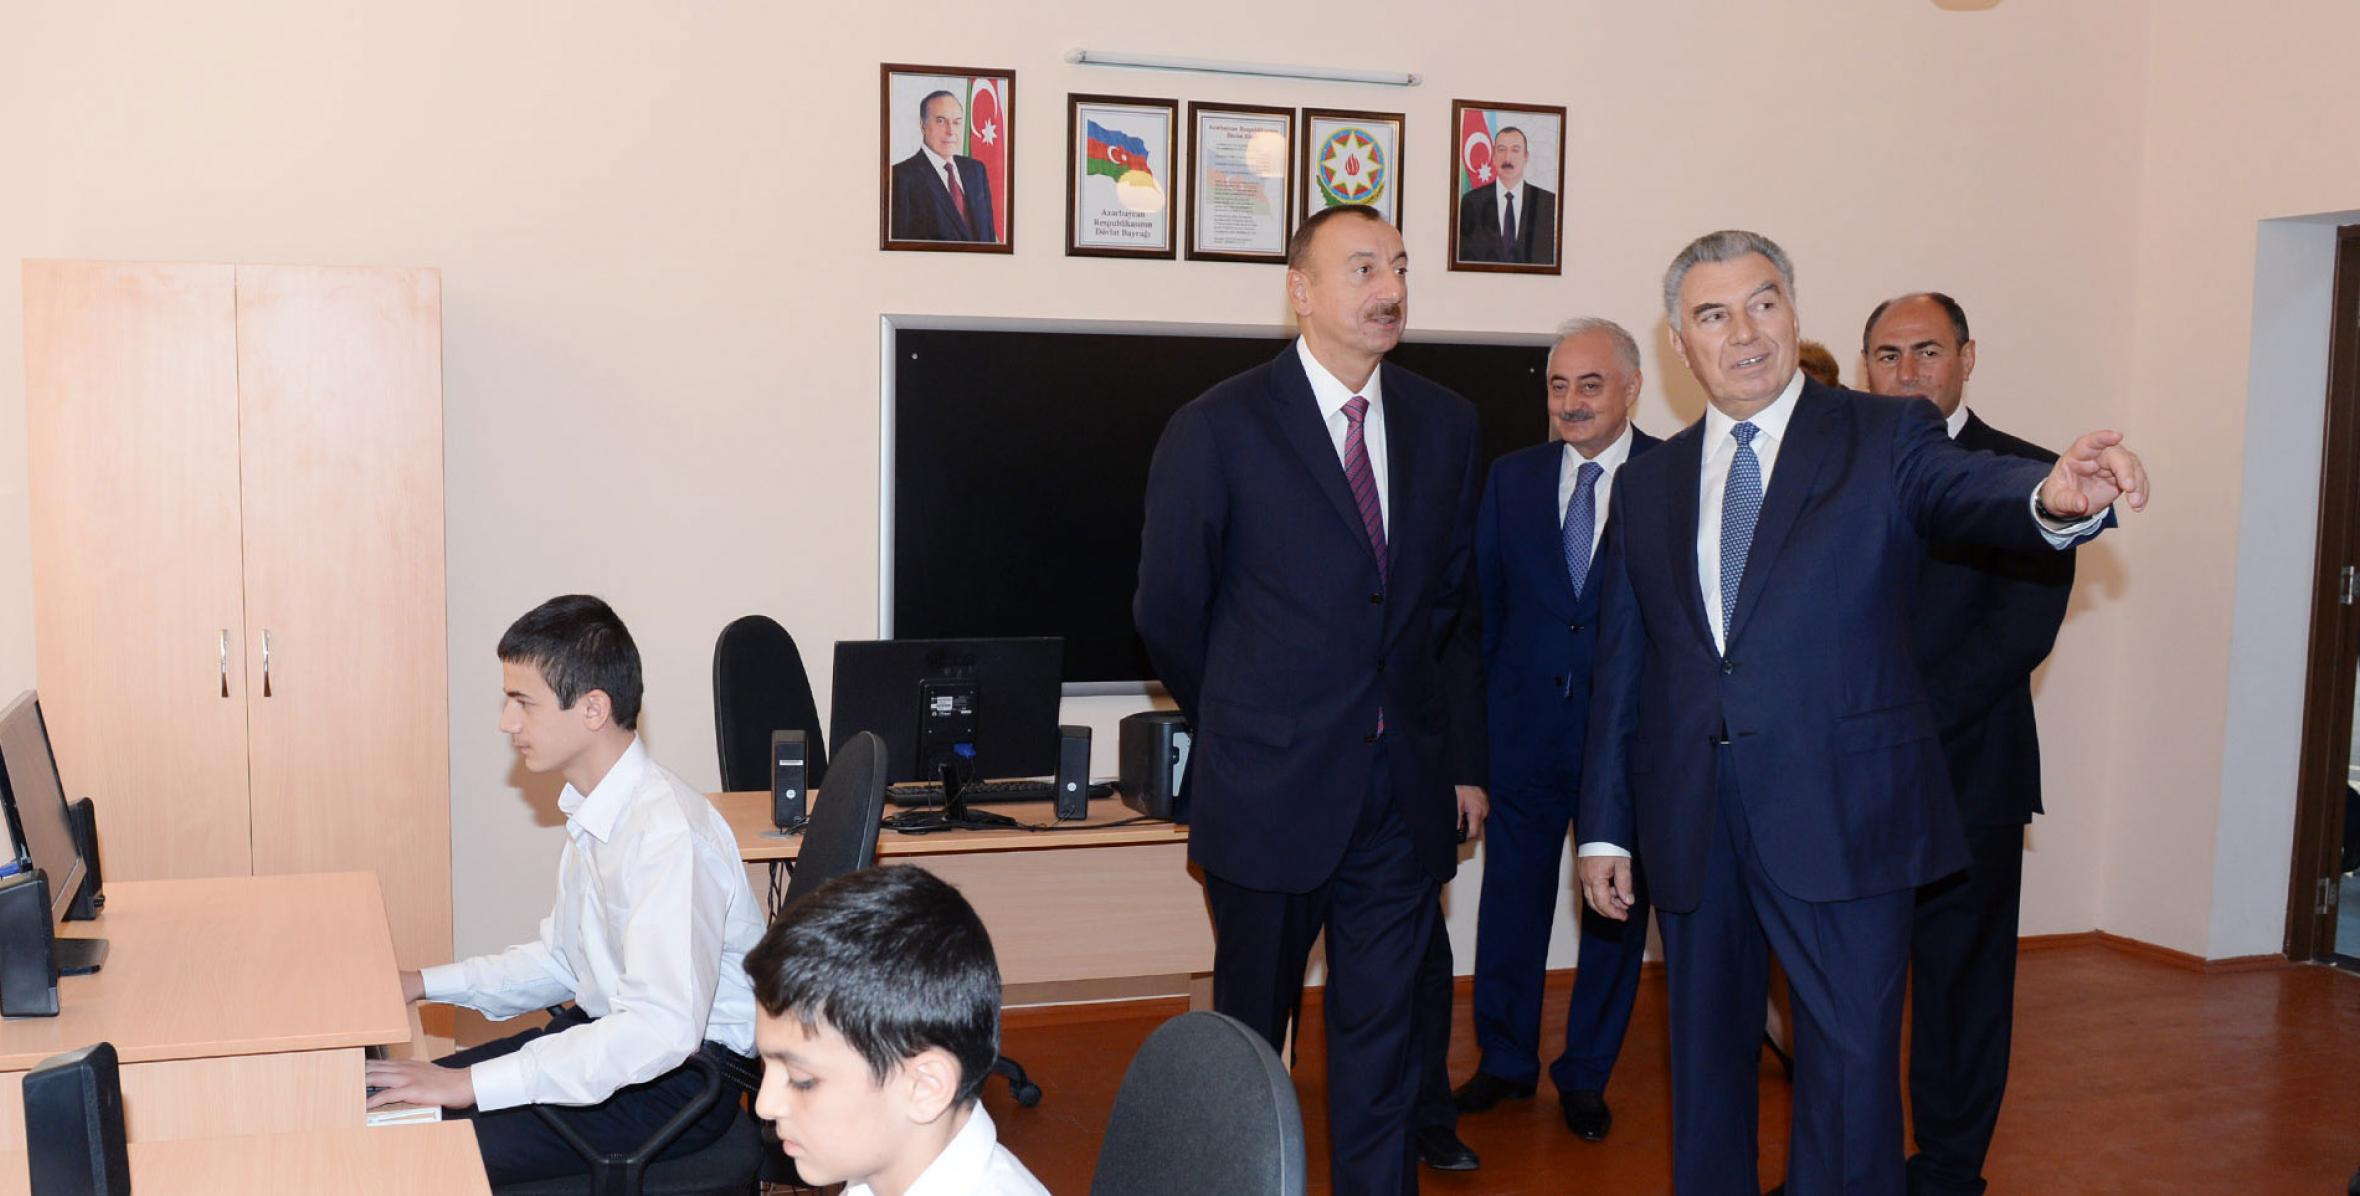 Ilham Aliyev reviewed a new settlement of 15 five-storey apartment buildings for 866 IDP families in Barda